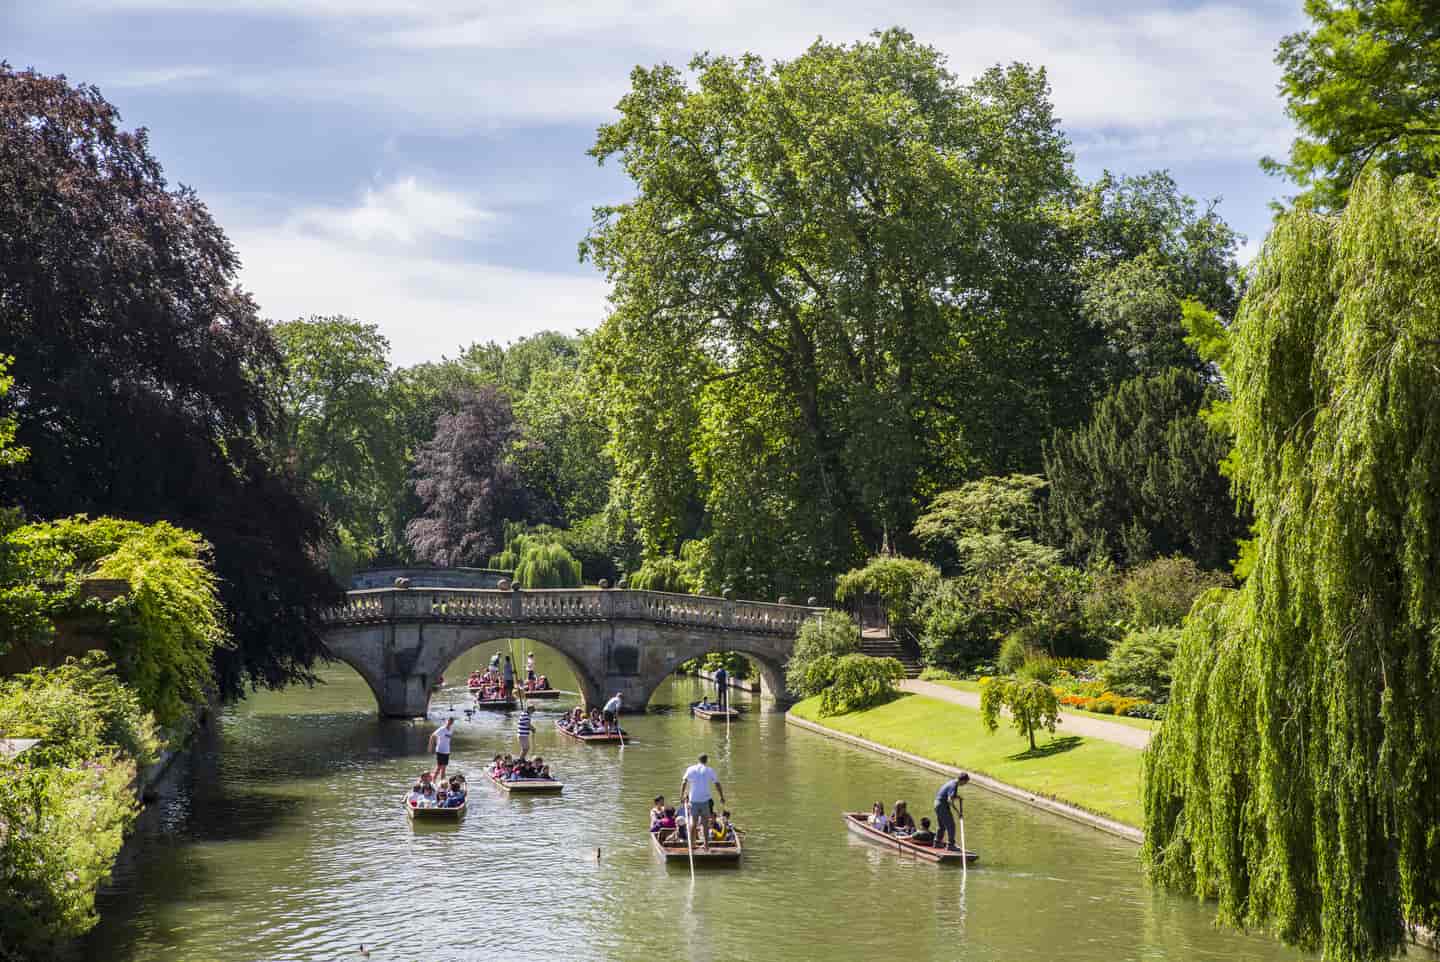 Student Accommodation in Cambridge - Punting on the River Cam